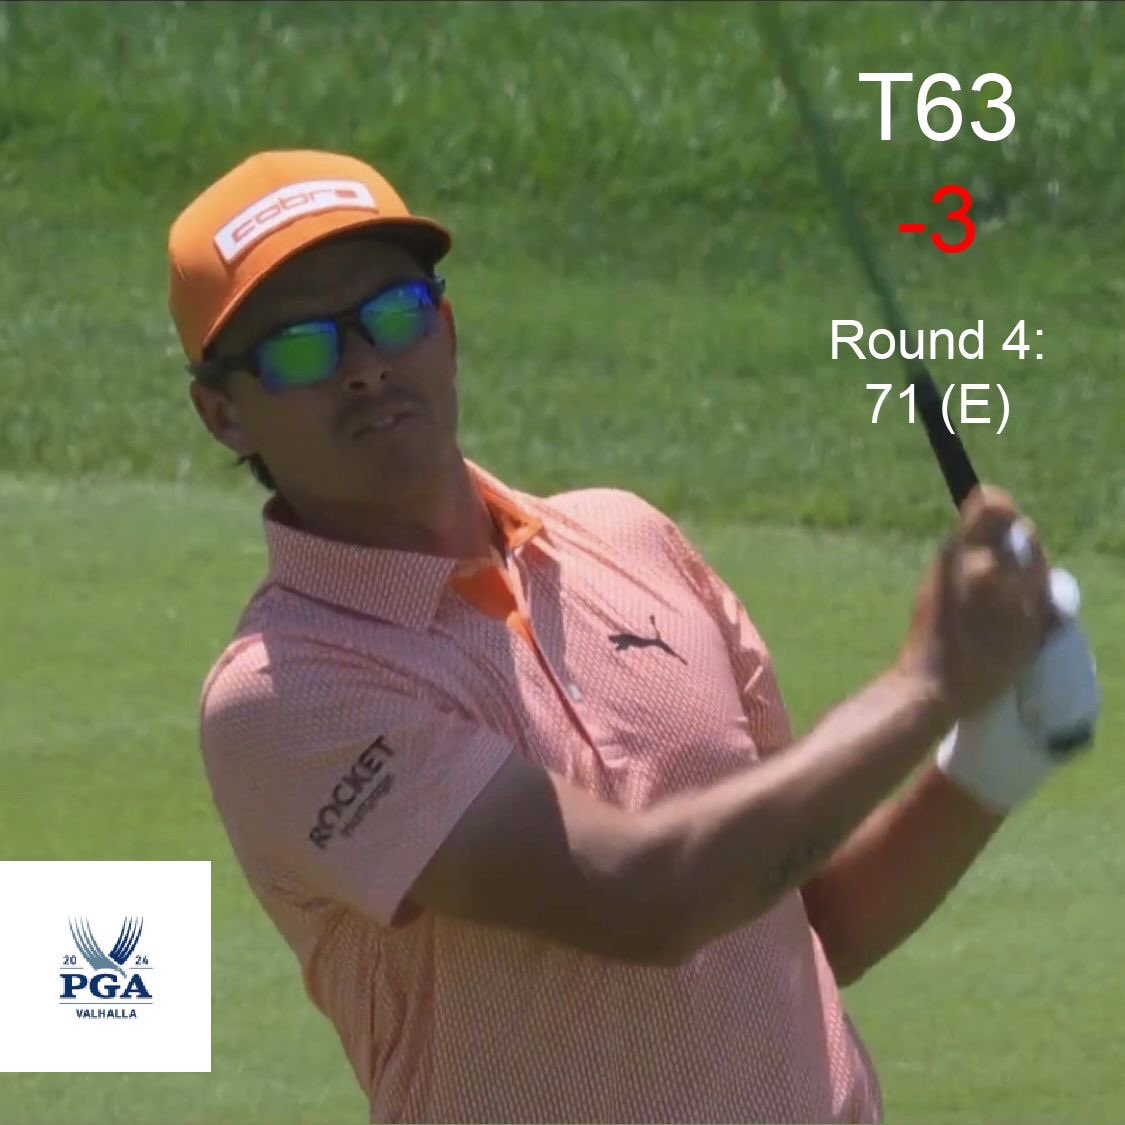 Sunday 71 (E) for @RickieFowler closes out the @PGAChampionship and a pretty average week all around but still four rounds in the books #rickiefowler #golf #pga #pgatour #cobragolf #pumagolf #cobrapumagolf